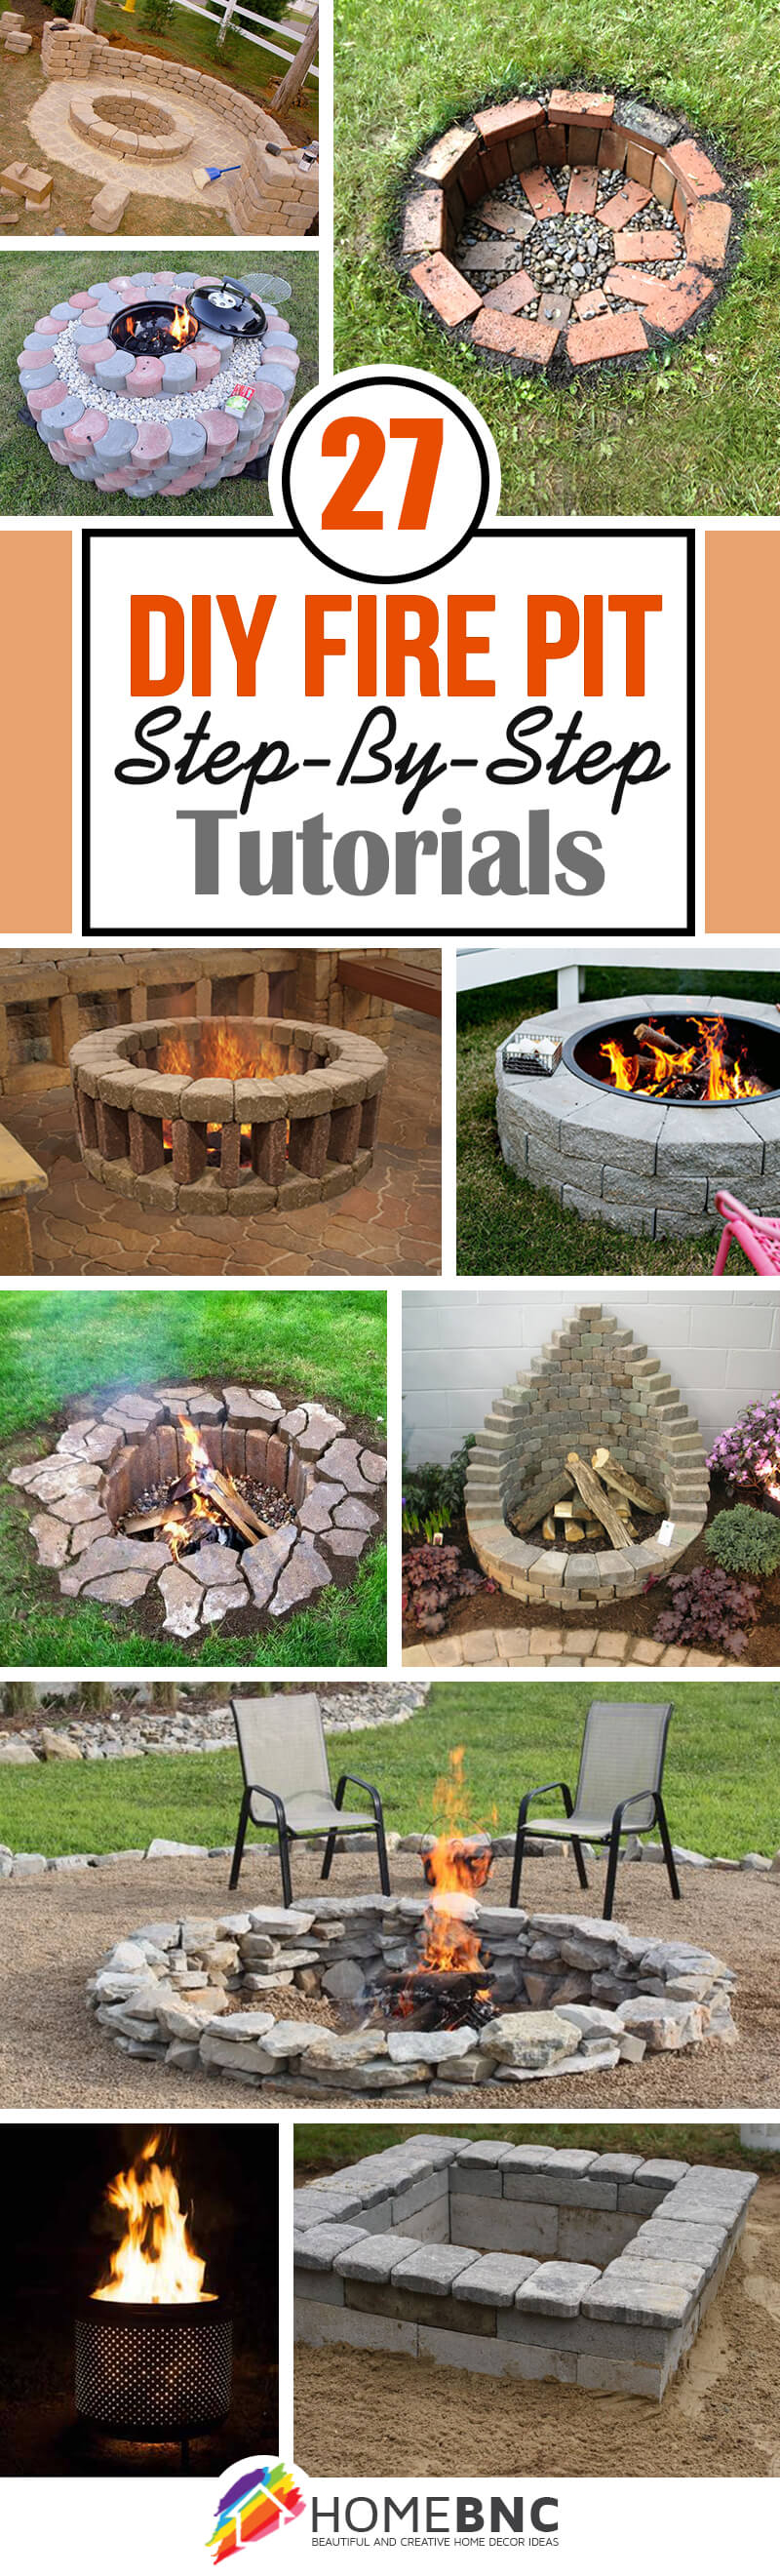 27 Best Diy Firepit Ideas And Designs, Small Backyard Fire Pit